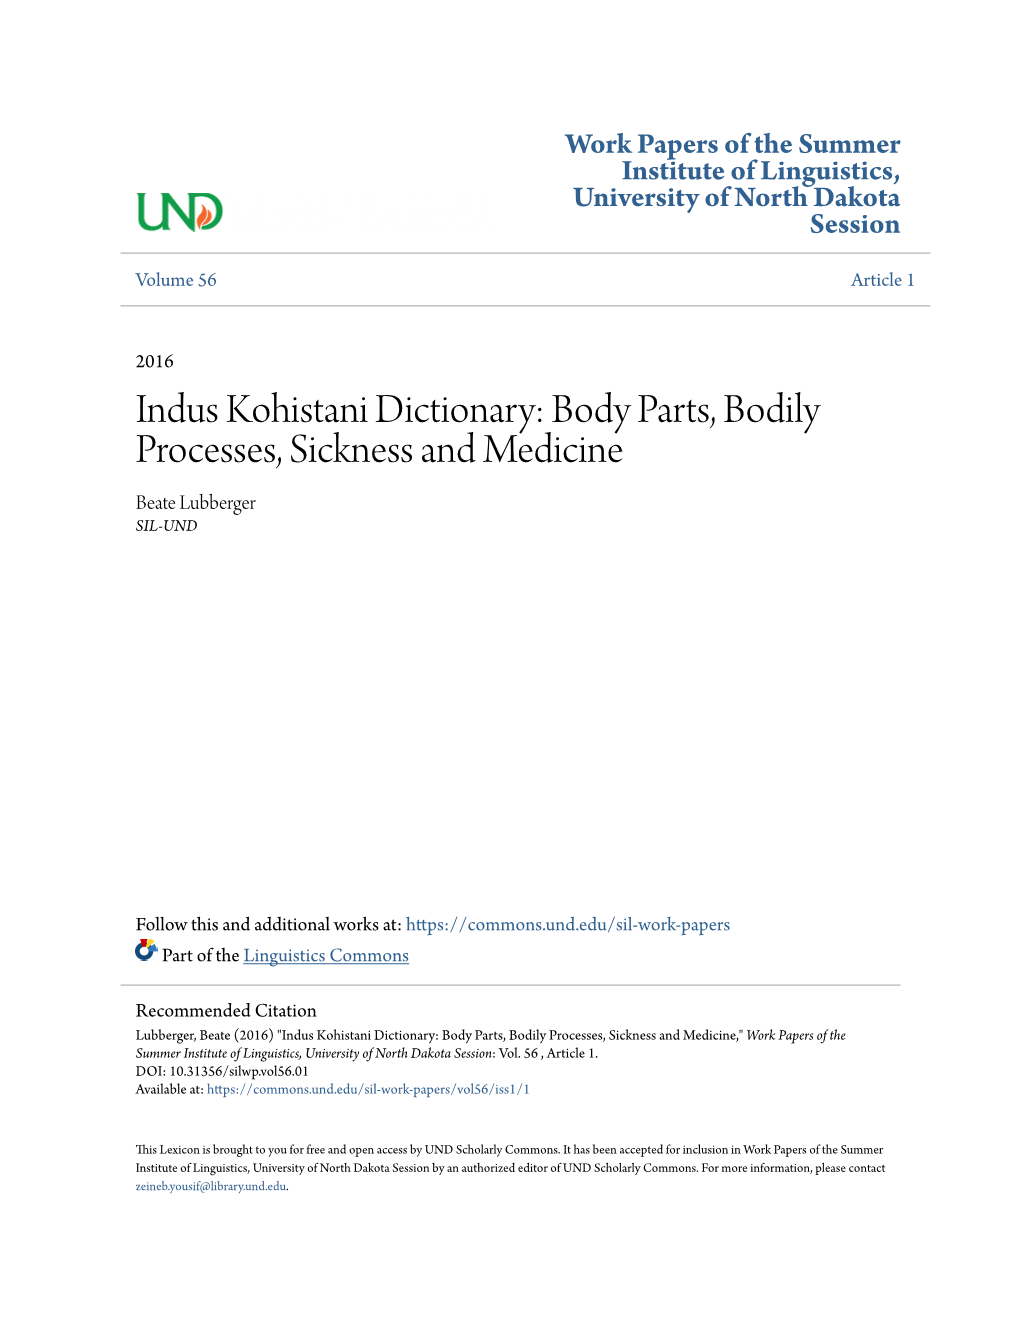 Indus Kohistani Dictionary: Body Parts, Bodily Processes, Sickness and Medicine Beate Lubberger SIL-UND